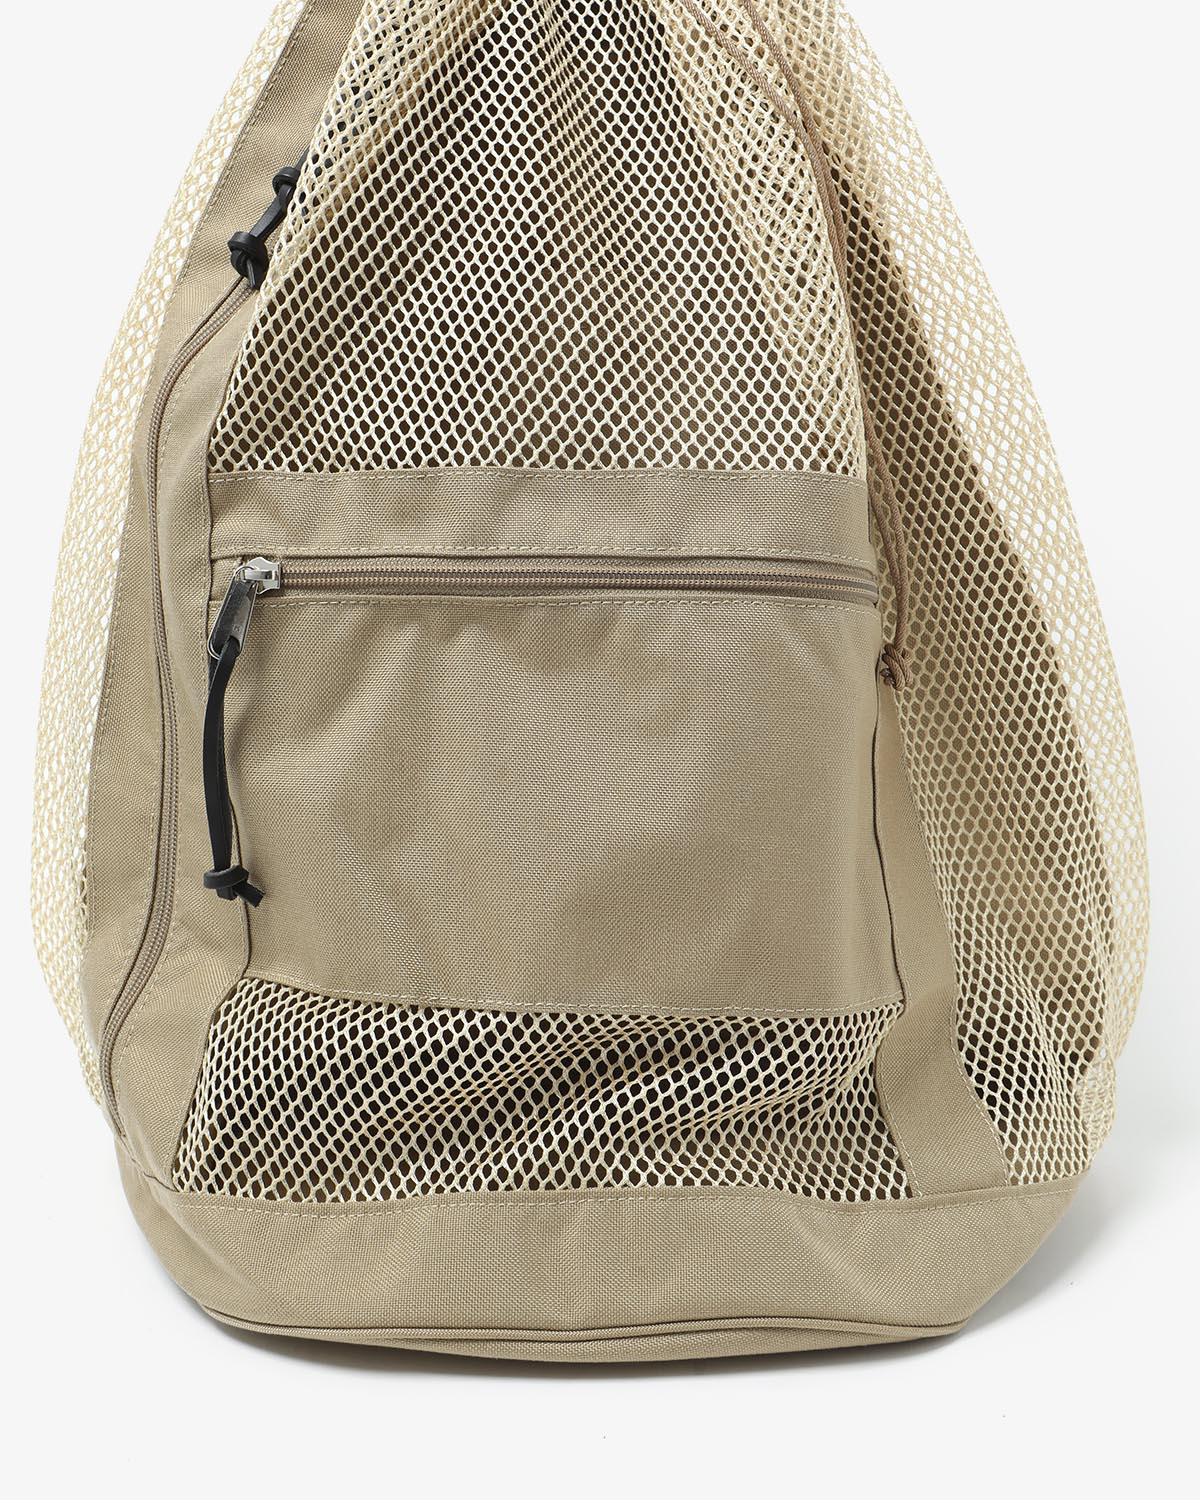 MESH LARGE BACKPACK MADE BY AETA